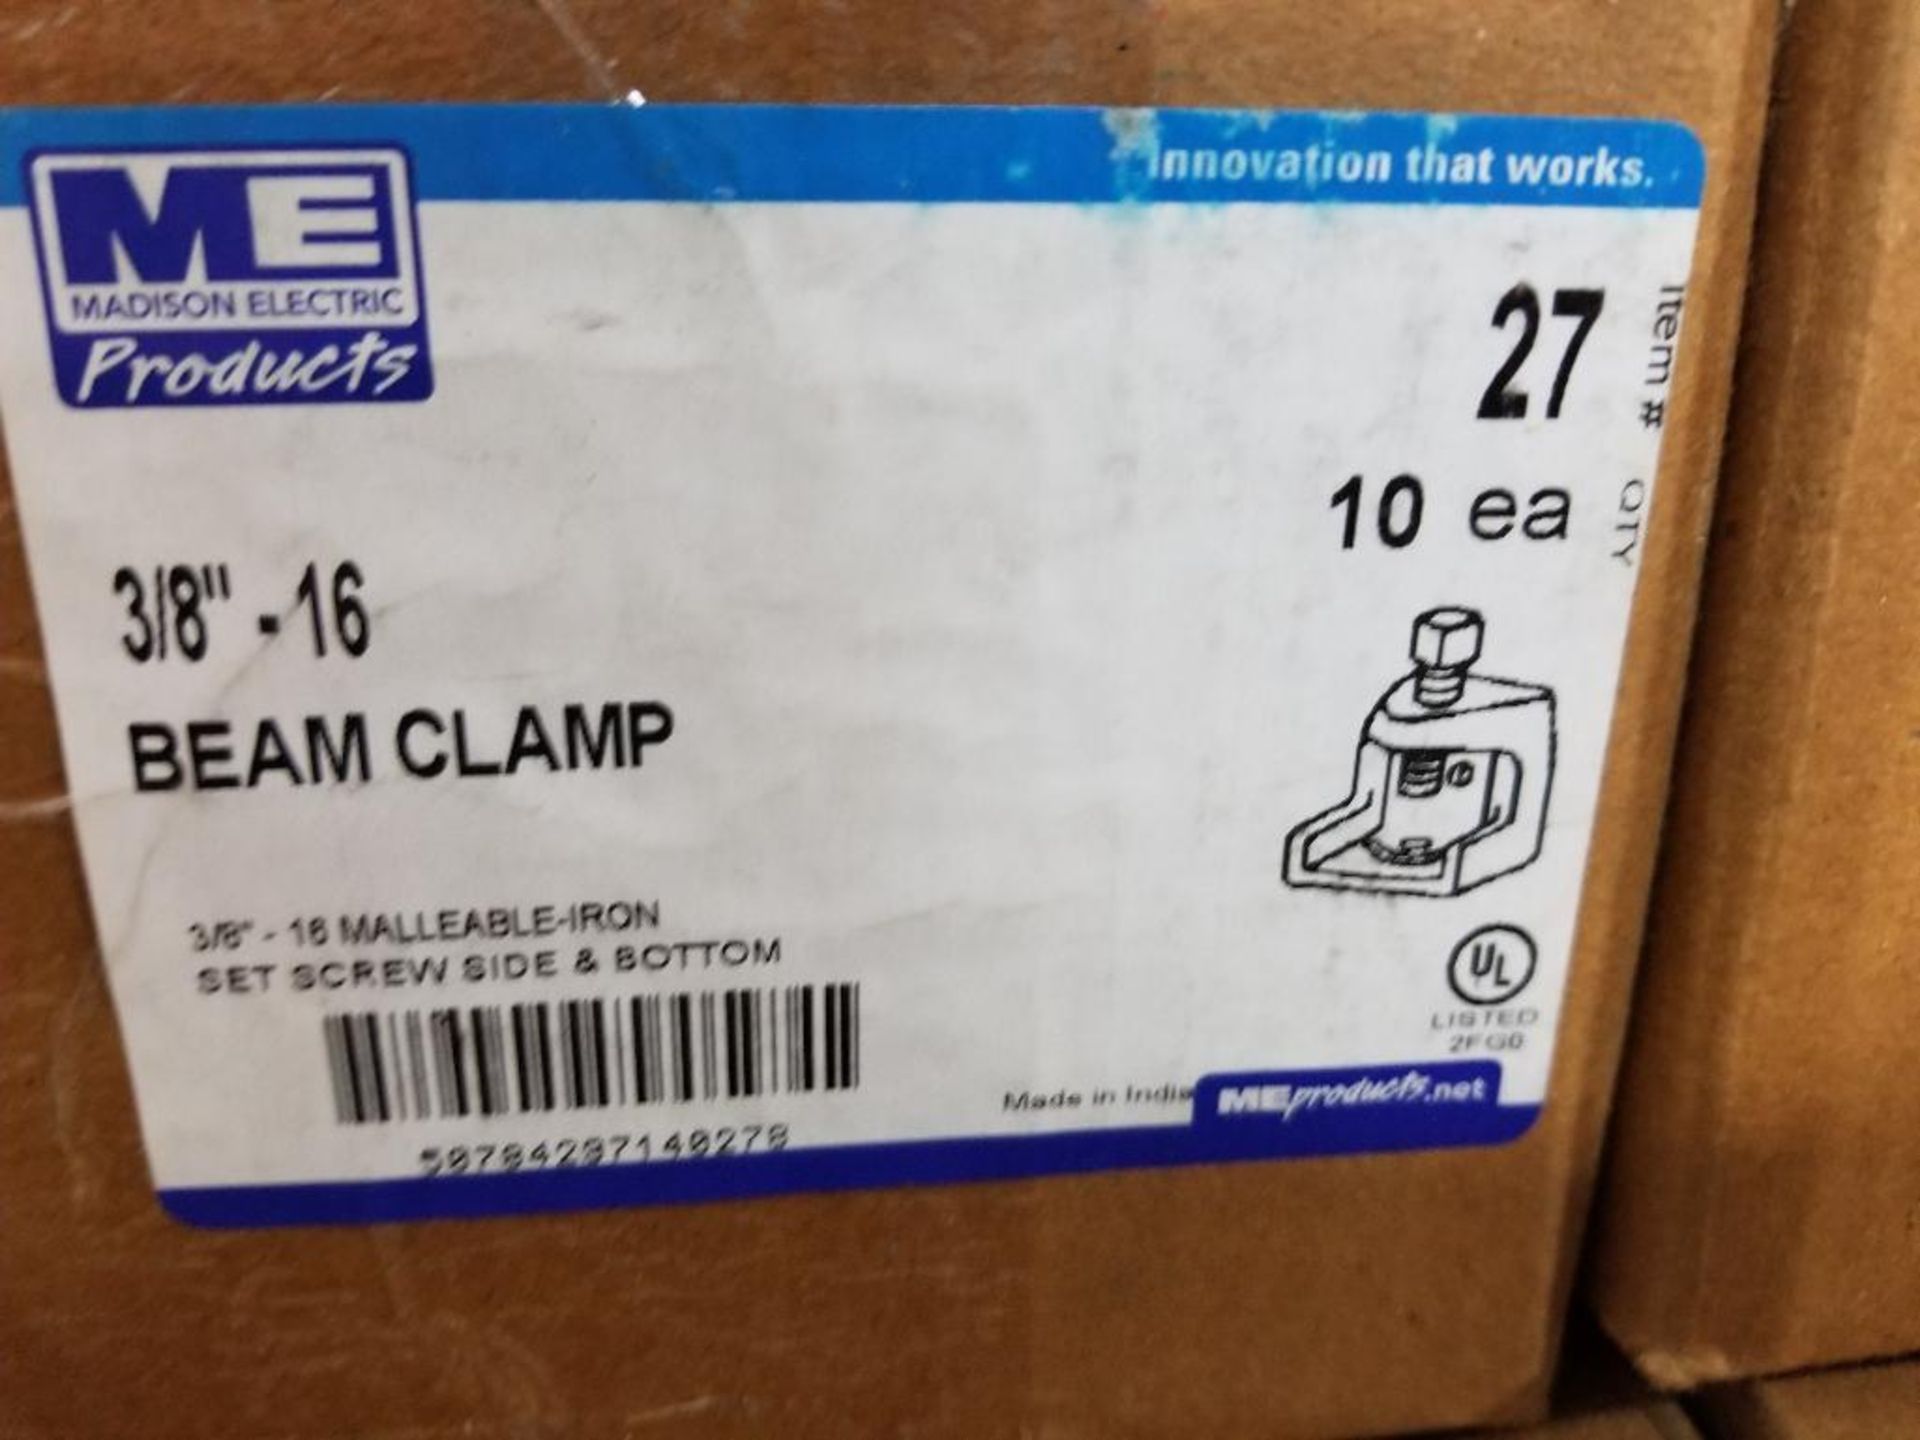 Qty 100 - Madison Electric beam clamp. Model 27, 3/8"-16. New in bulk box (10 per box) - Image 2 of 2